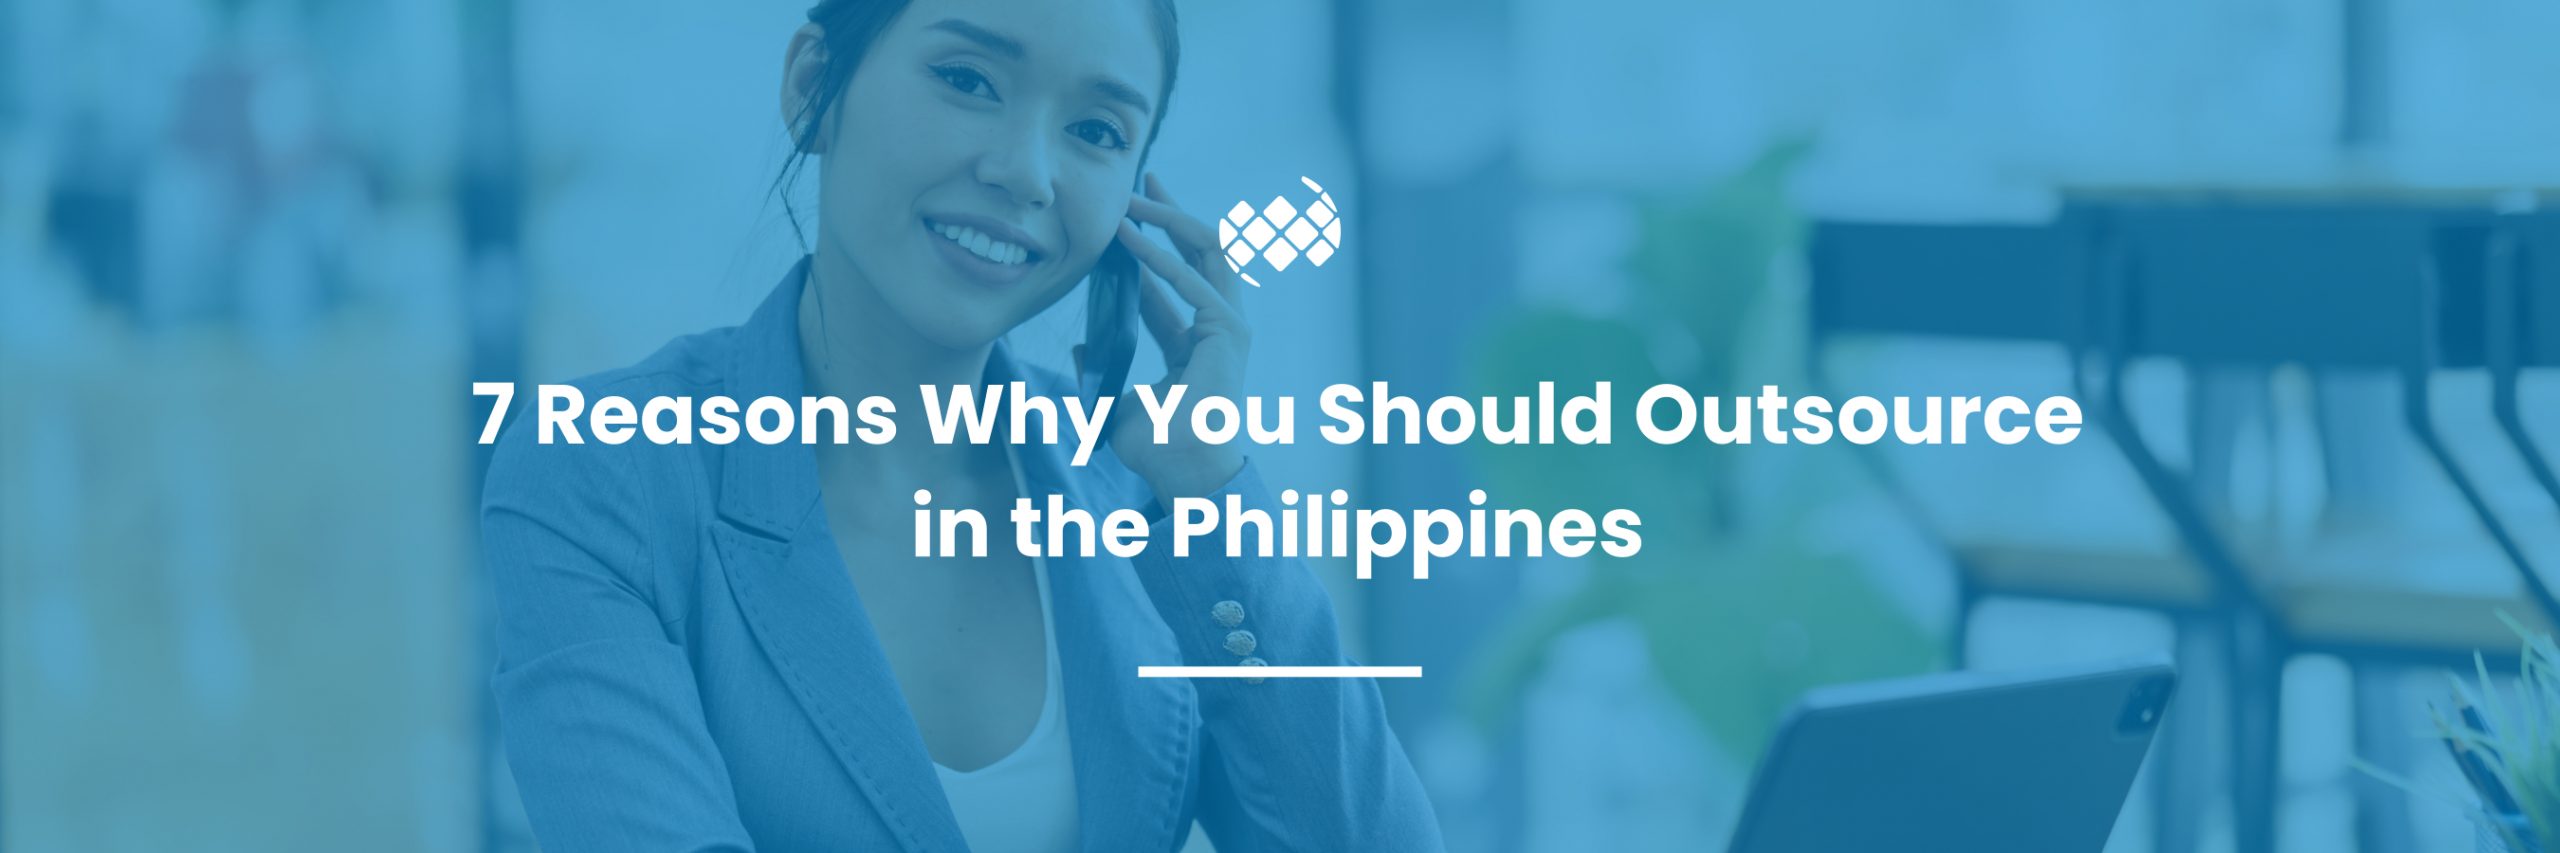 outsource in the Philippines